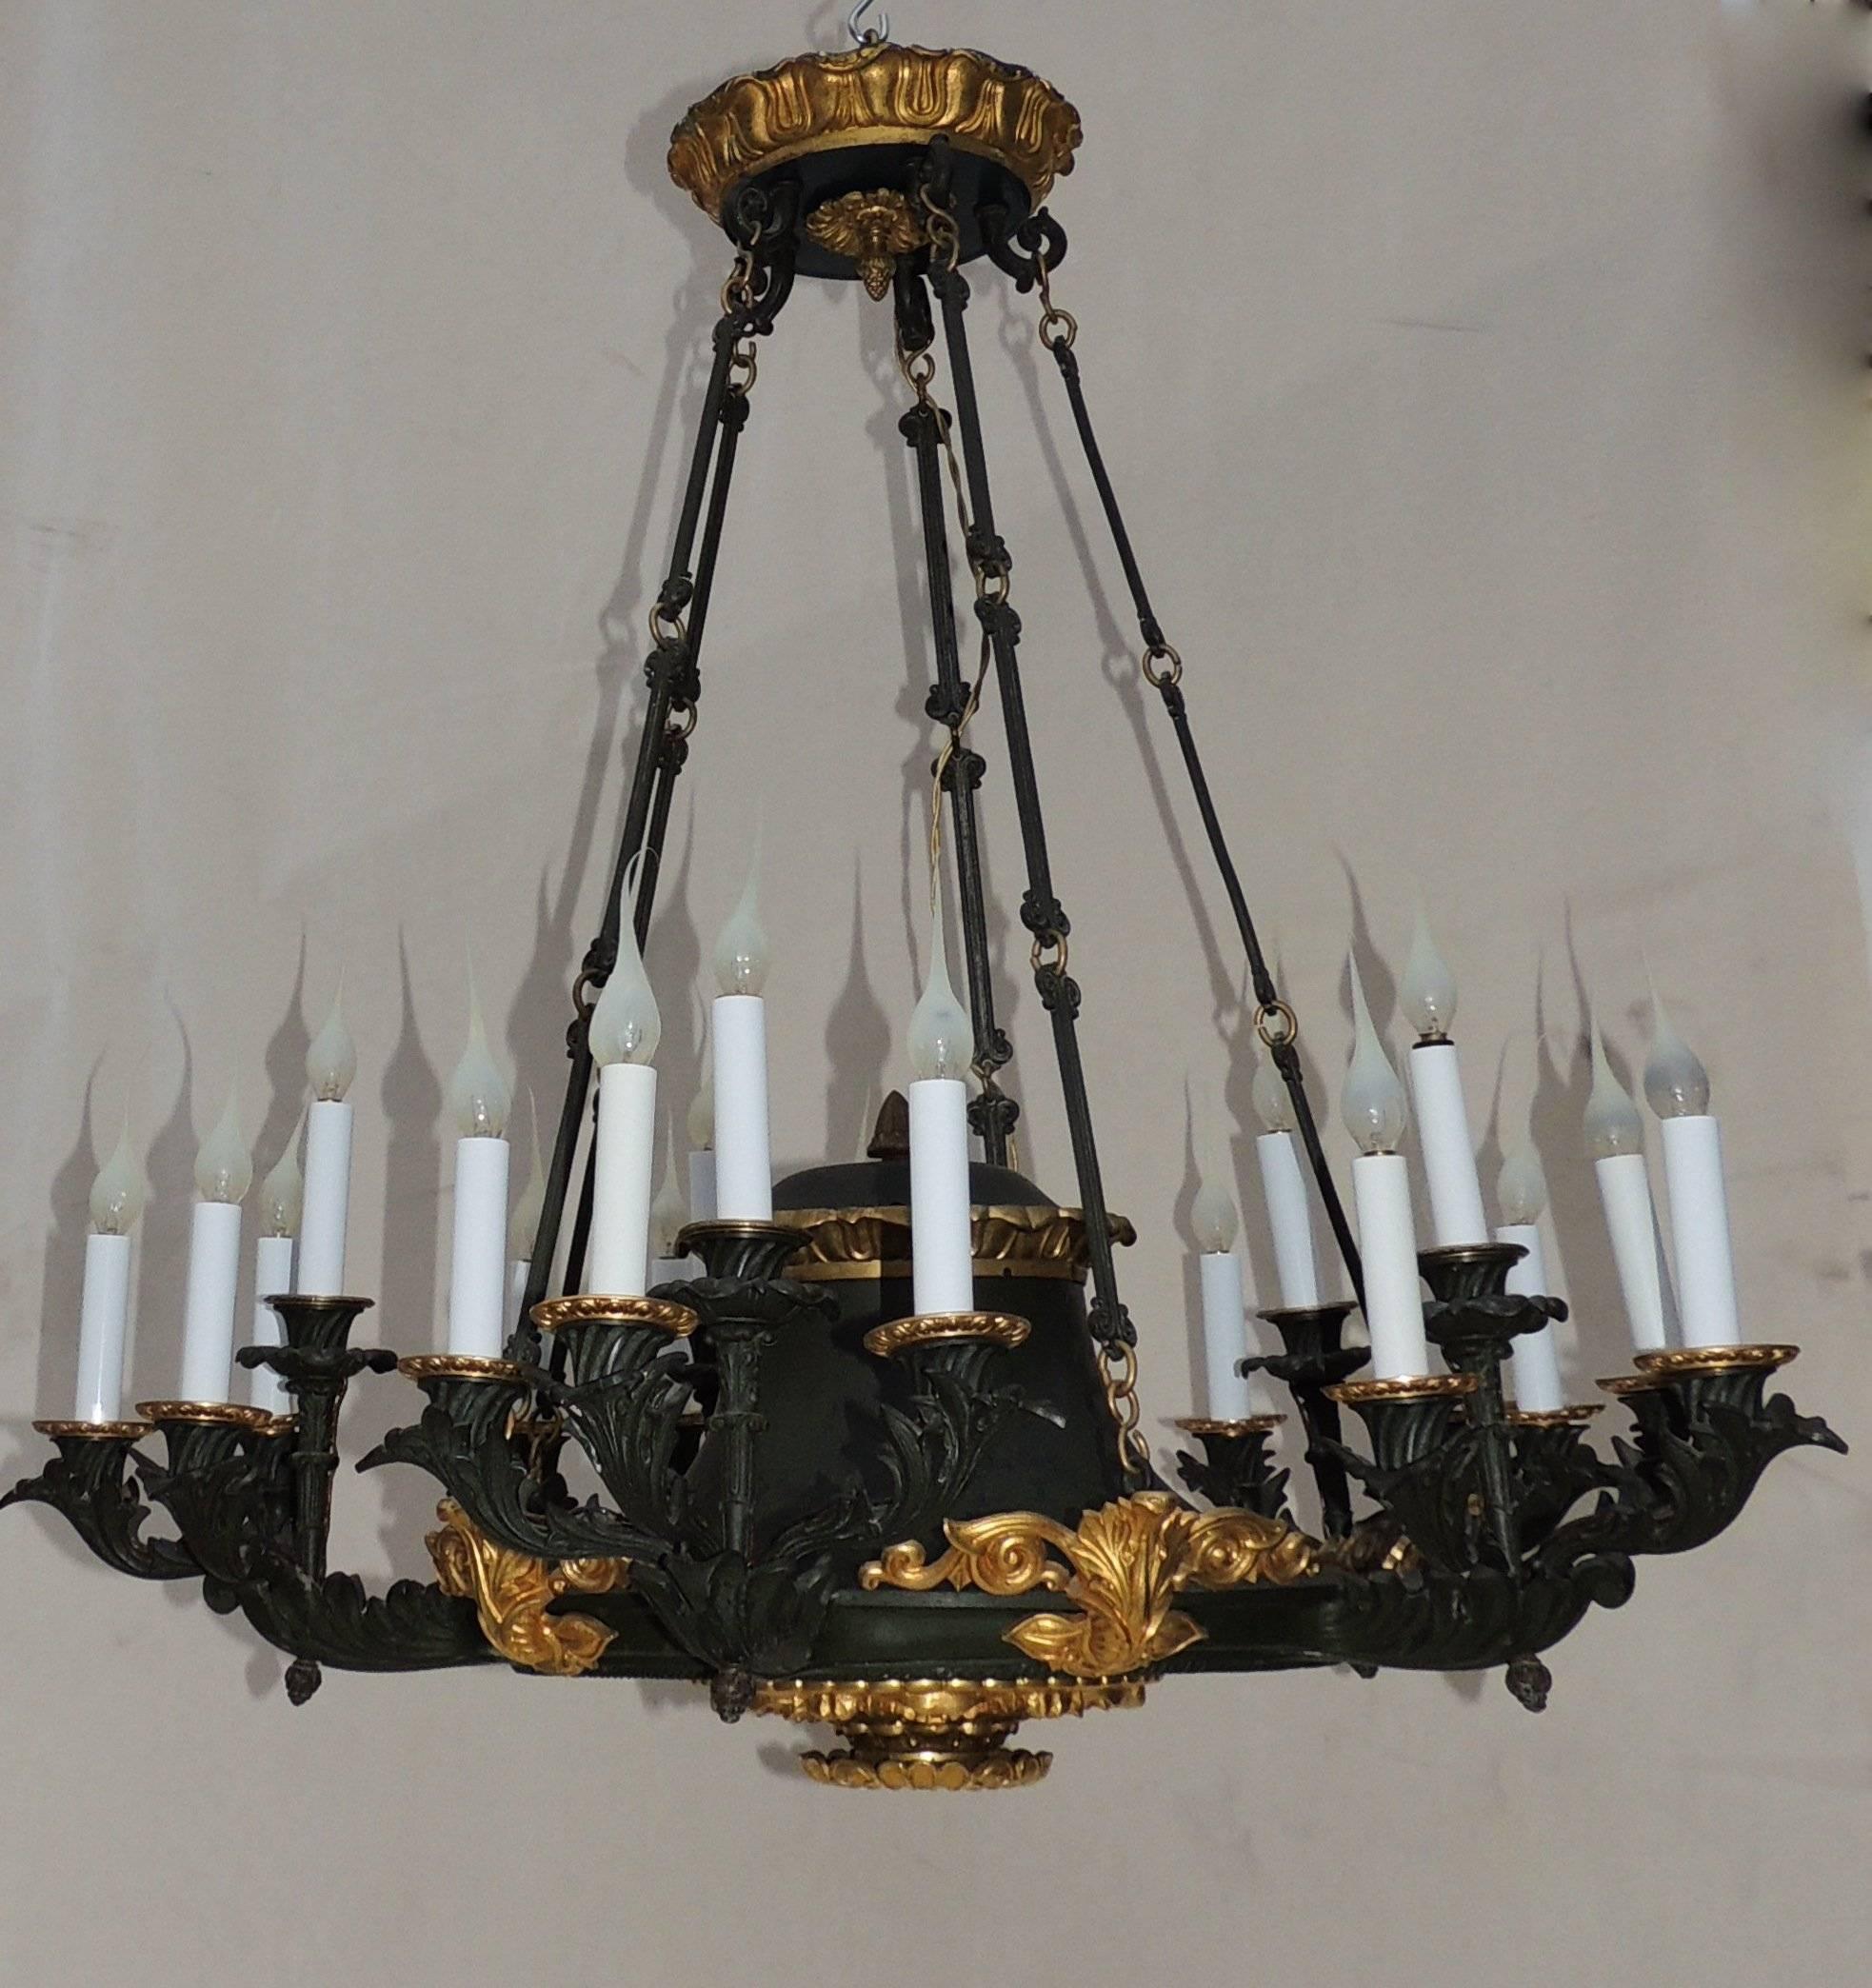 Palatial elegant French empire patinated green tone and doré bronze fifteen-light neoclassical chandelier.

Measures: 32